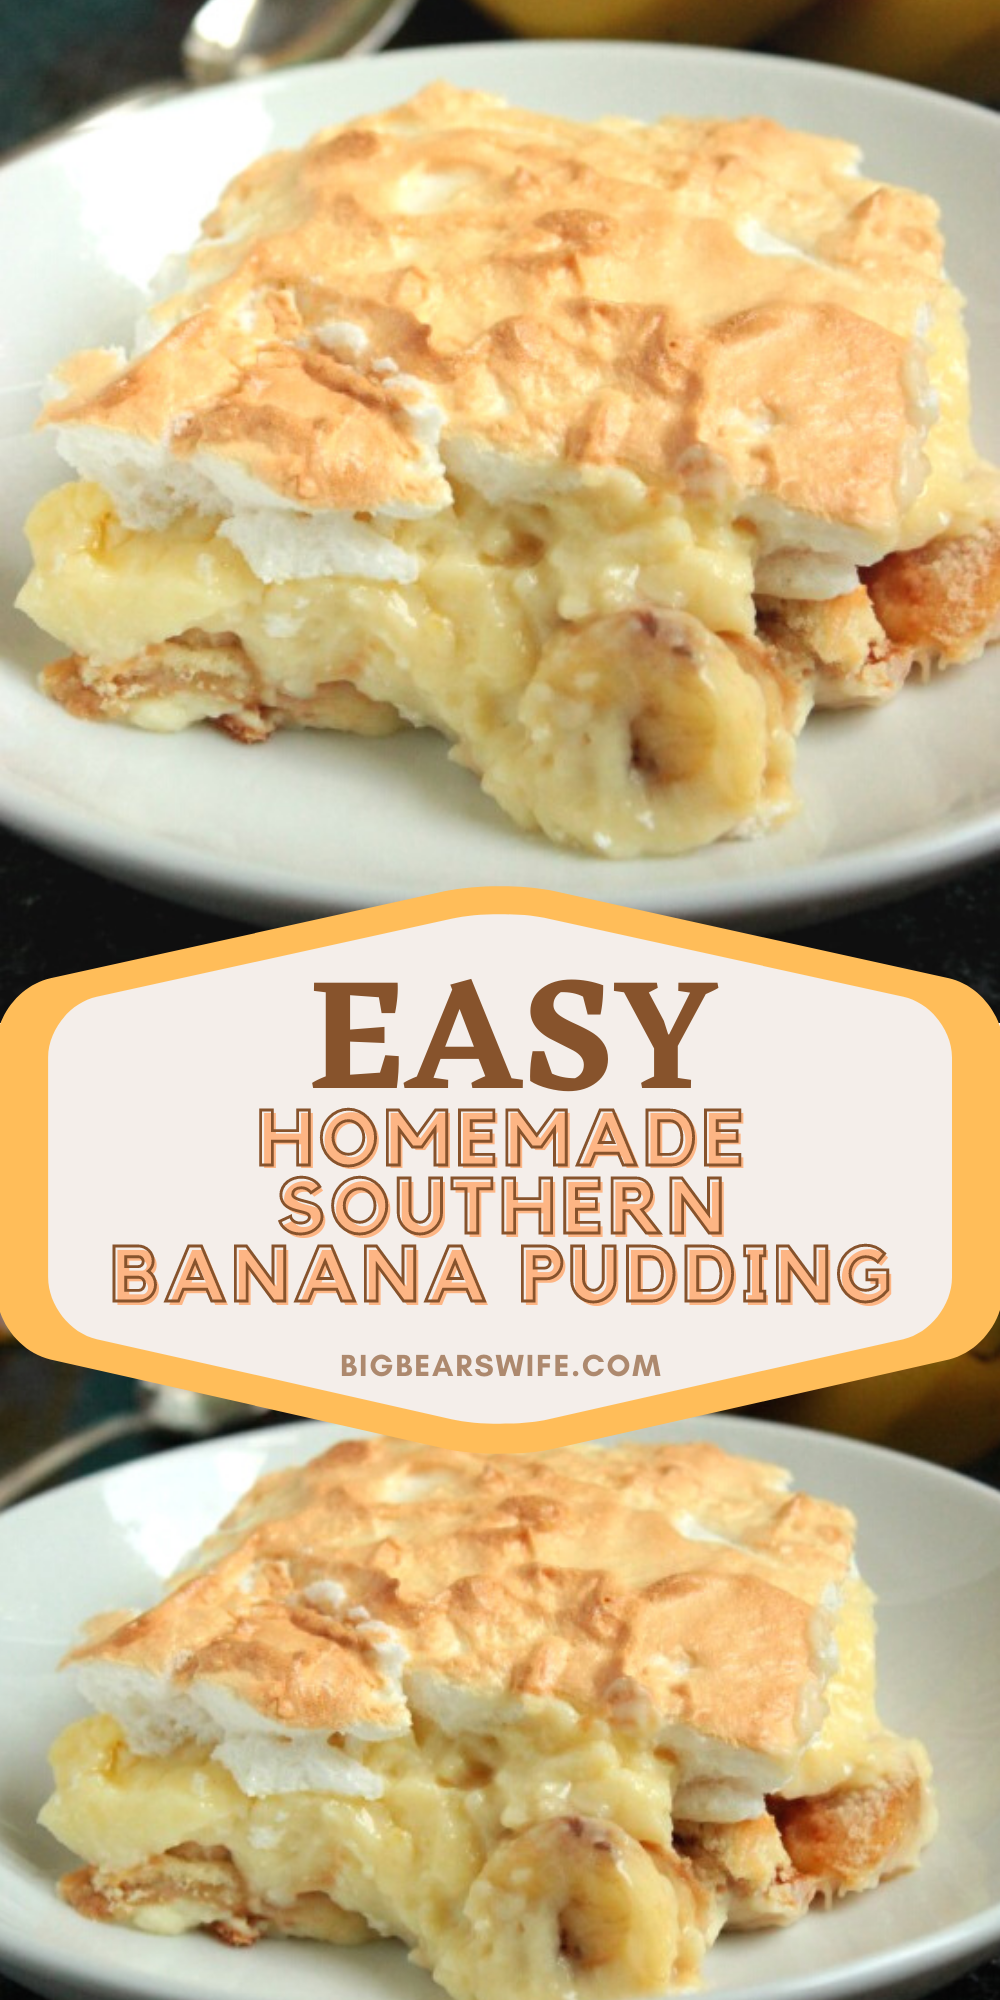 Serve is hot or cold, this Homemade Southern Banana Pudding is going to be loved by all! Roasting the banana gives it a richer banana flavor too! via @bigbearswife